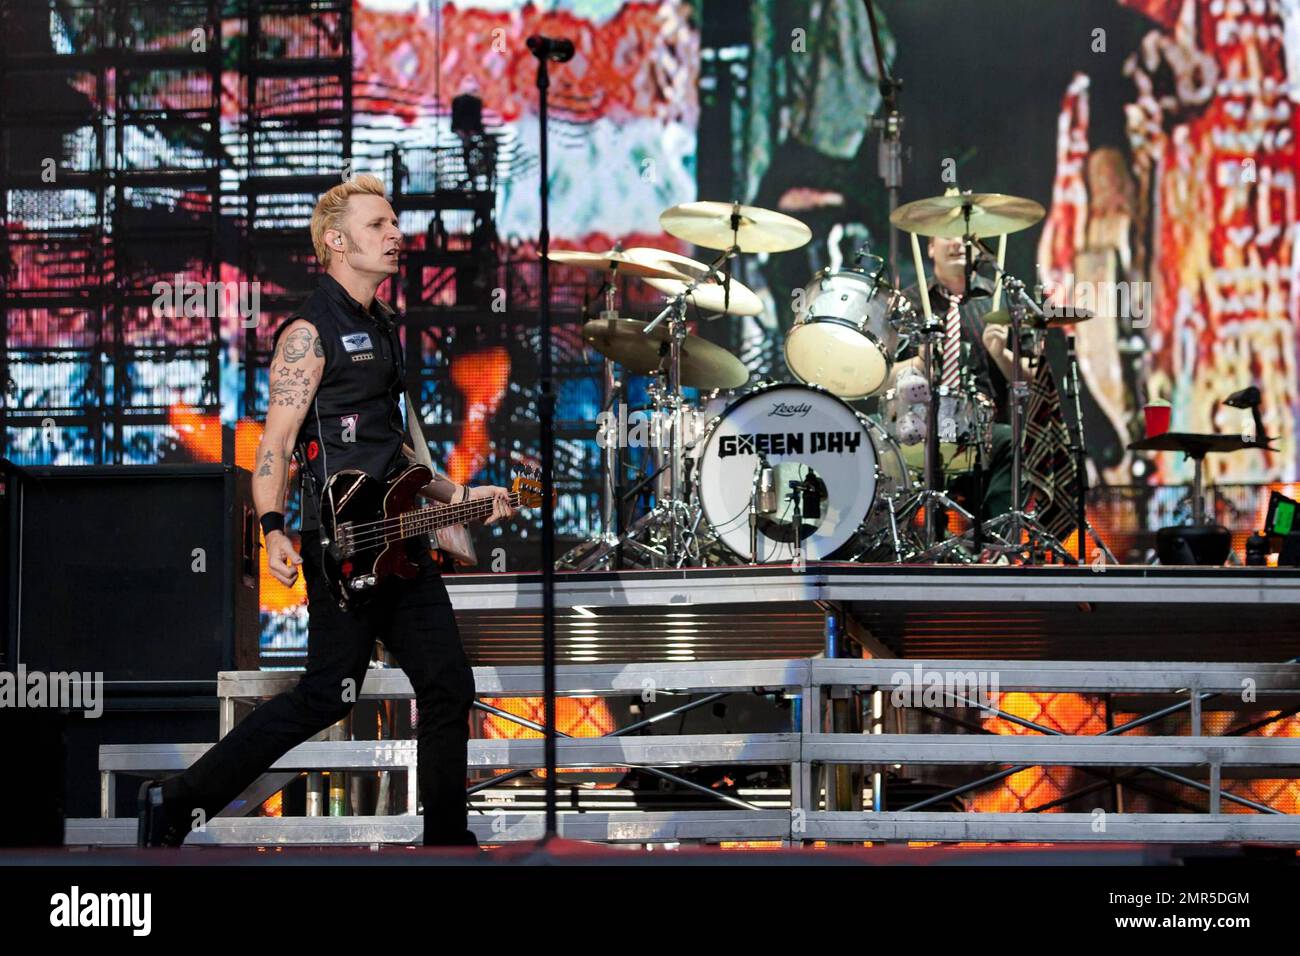 Mike Dirnt and drummer TrŽ Cool of the punk rock band Green Day perform live at Wembley Stadium. The group, who formed in 1987, played the 90000 capacity stadium with Joan Jett and Frank Turner as the opening act.  The Wembley show is just one of many that the trio will play as part of their world summer tour, which will see them perform in Europe, North and South America.  Green Day has sold more than 50 million albums worldwide and have recently become the subject of the successful video game Rock Band. London, UK. 06/19/10. Stock Photo